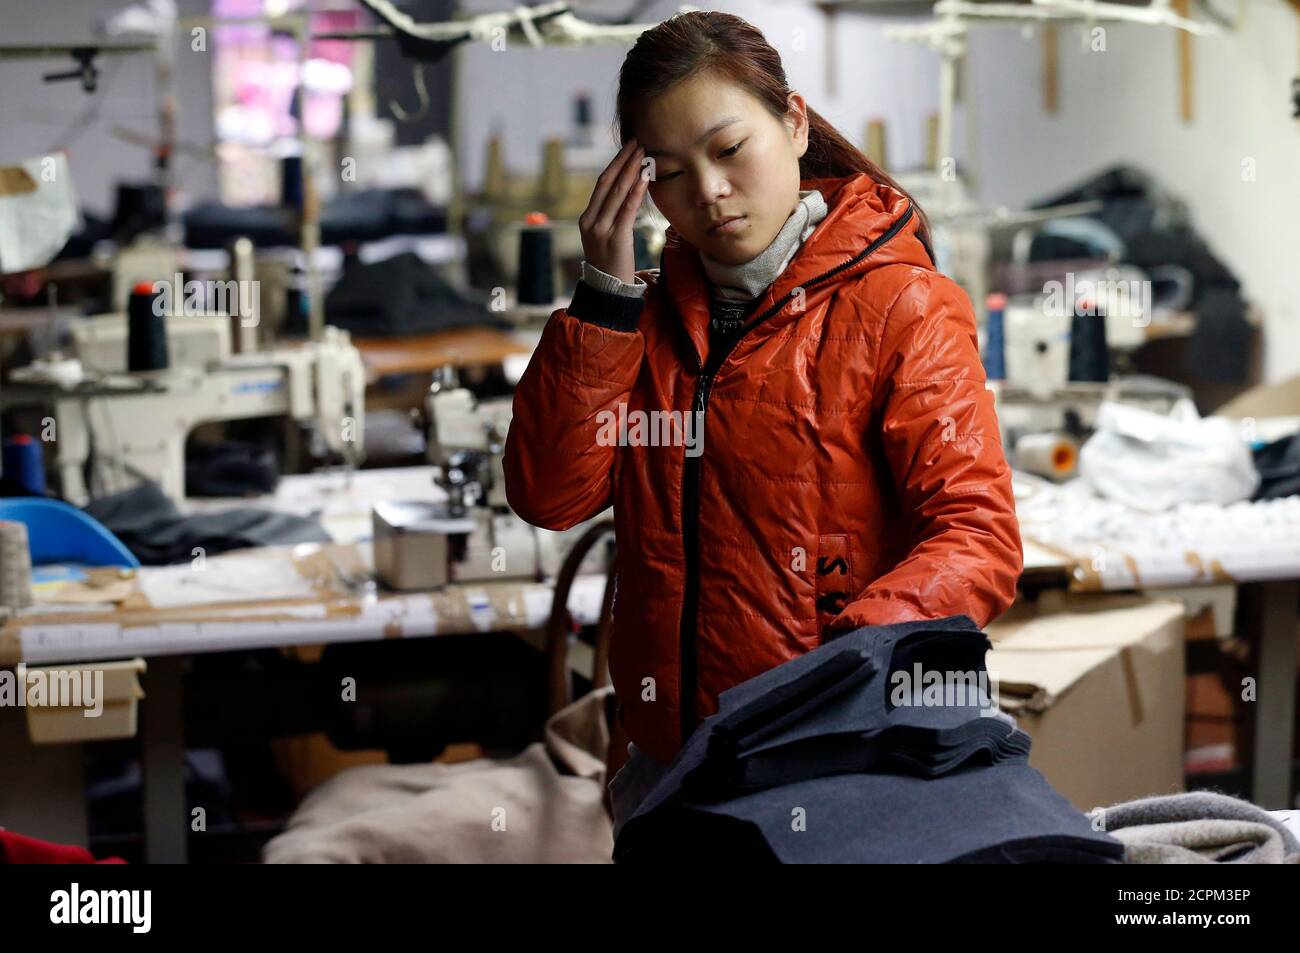 A Chinese immigrant gestures as police officers conduct a check at the Shen Wu textile factory in Prato December 9, 2013. Prato, the historical capital of Italy's textile business, has attracted the largest concentration of Chinese-run industry in Europe within less than 20 years. Yet Prato is also a thriving hub of illegality committed by both Italians and Chinese, a byproduct of globalisation gone wrong, many people in the city say. Picture taken December 9, 2013. To match Insight ITALY-SWEATSHOP/ REUTERS/Stefano Rellandini  (ITALY - Tags: BUSINESS TEXTILE SOCIETY IMMIGRATION) Stock Photo